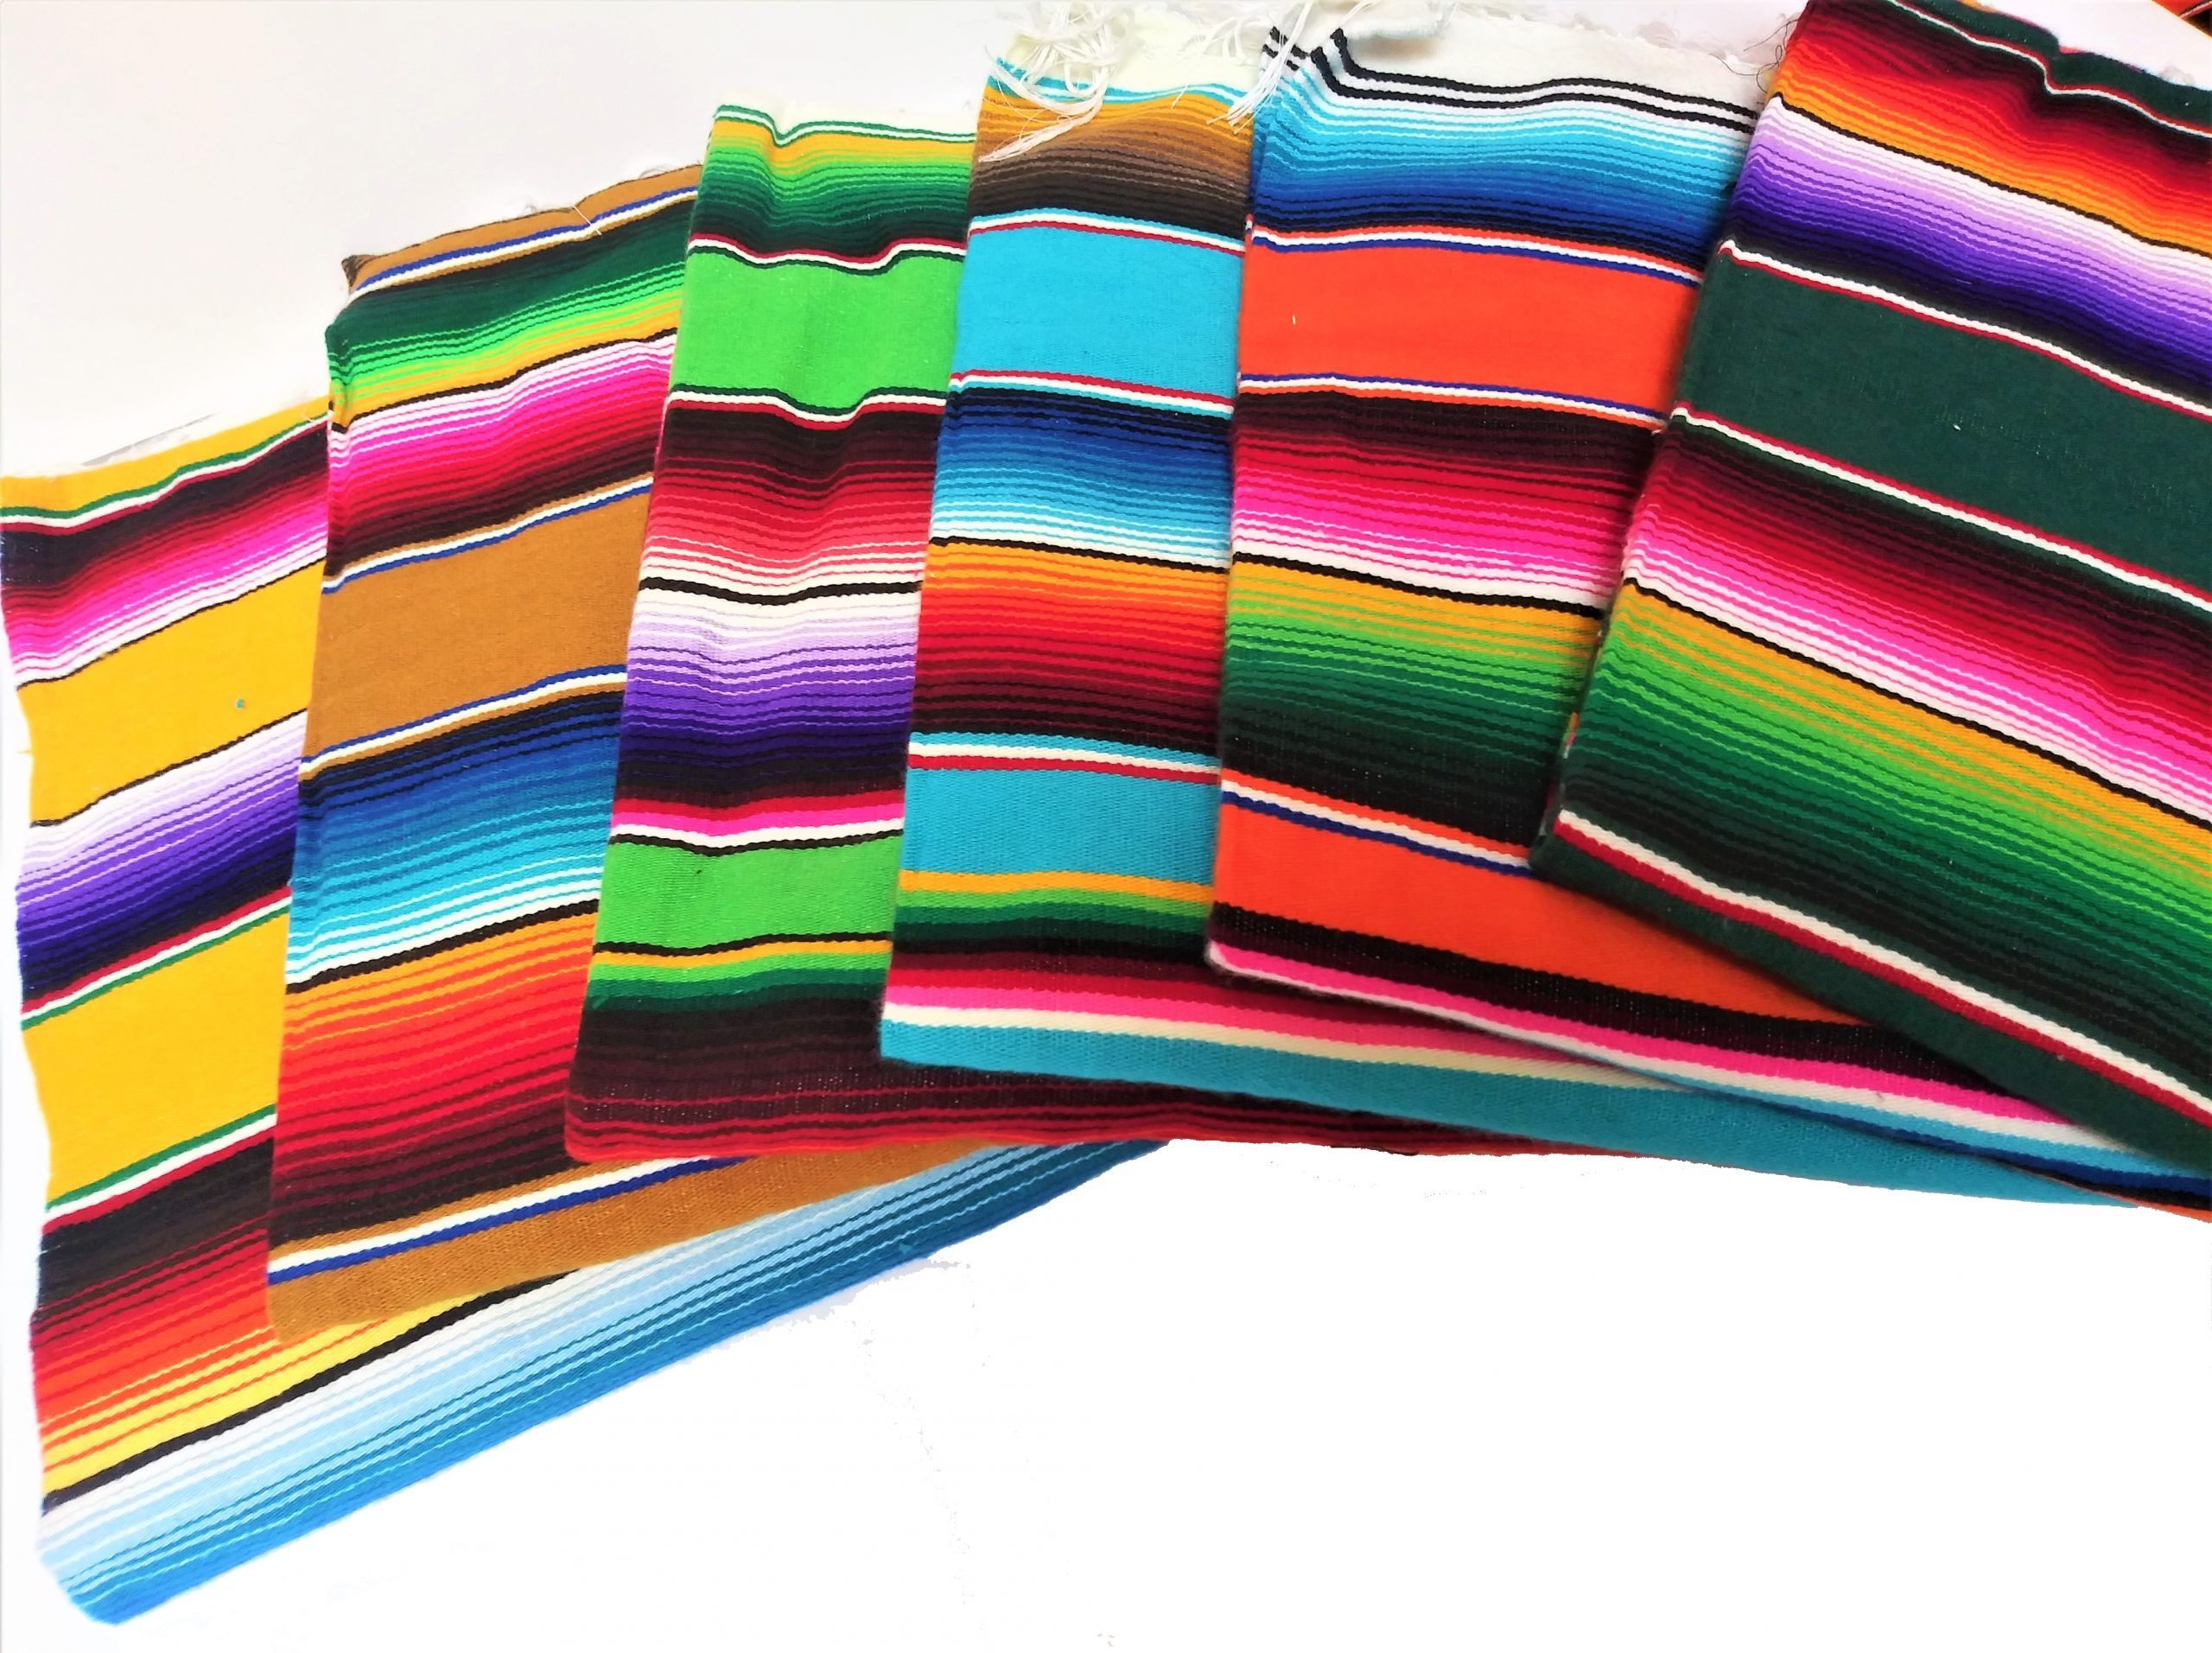 Mexican Serape Table Cloth 80"x56" 85% Acrylic and 15% Cotton 